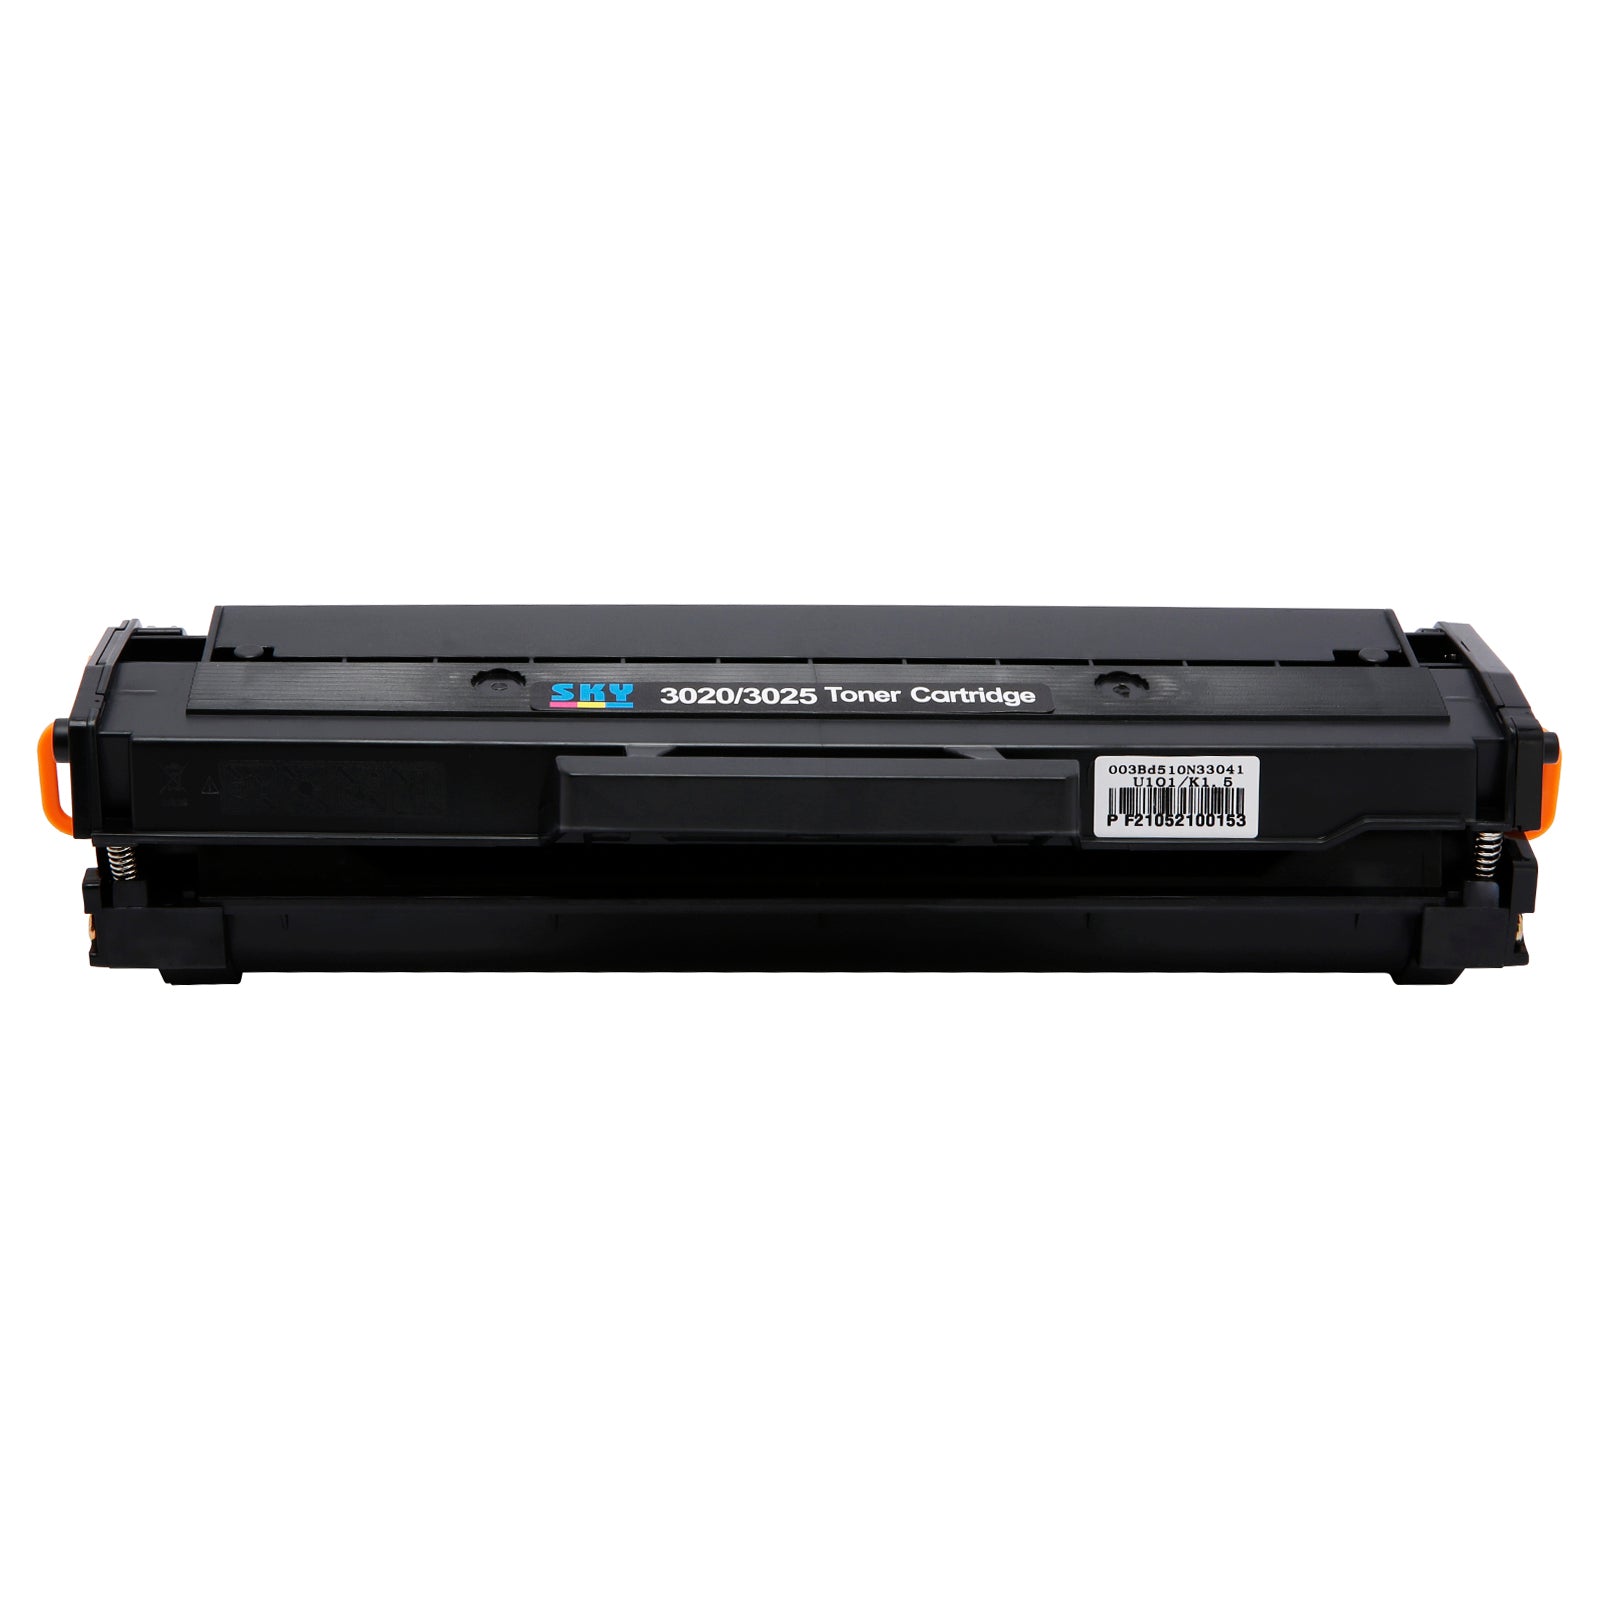 SKY 3020 /3025  Toner Cartridge for Xerox Phaser 3020 and Xerox WorkCentre 3025